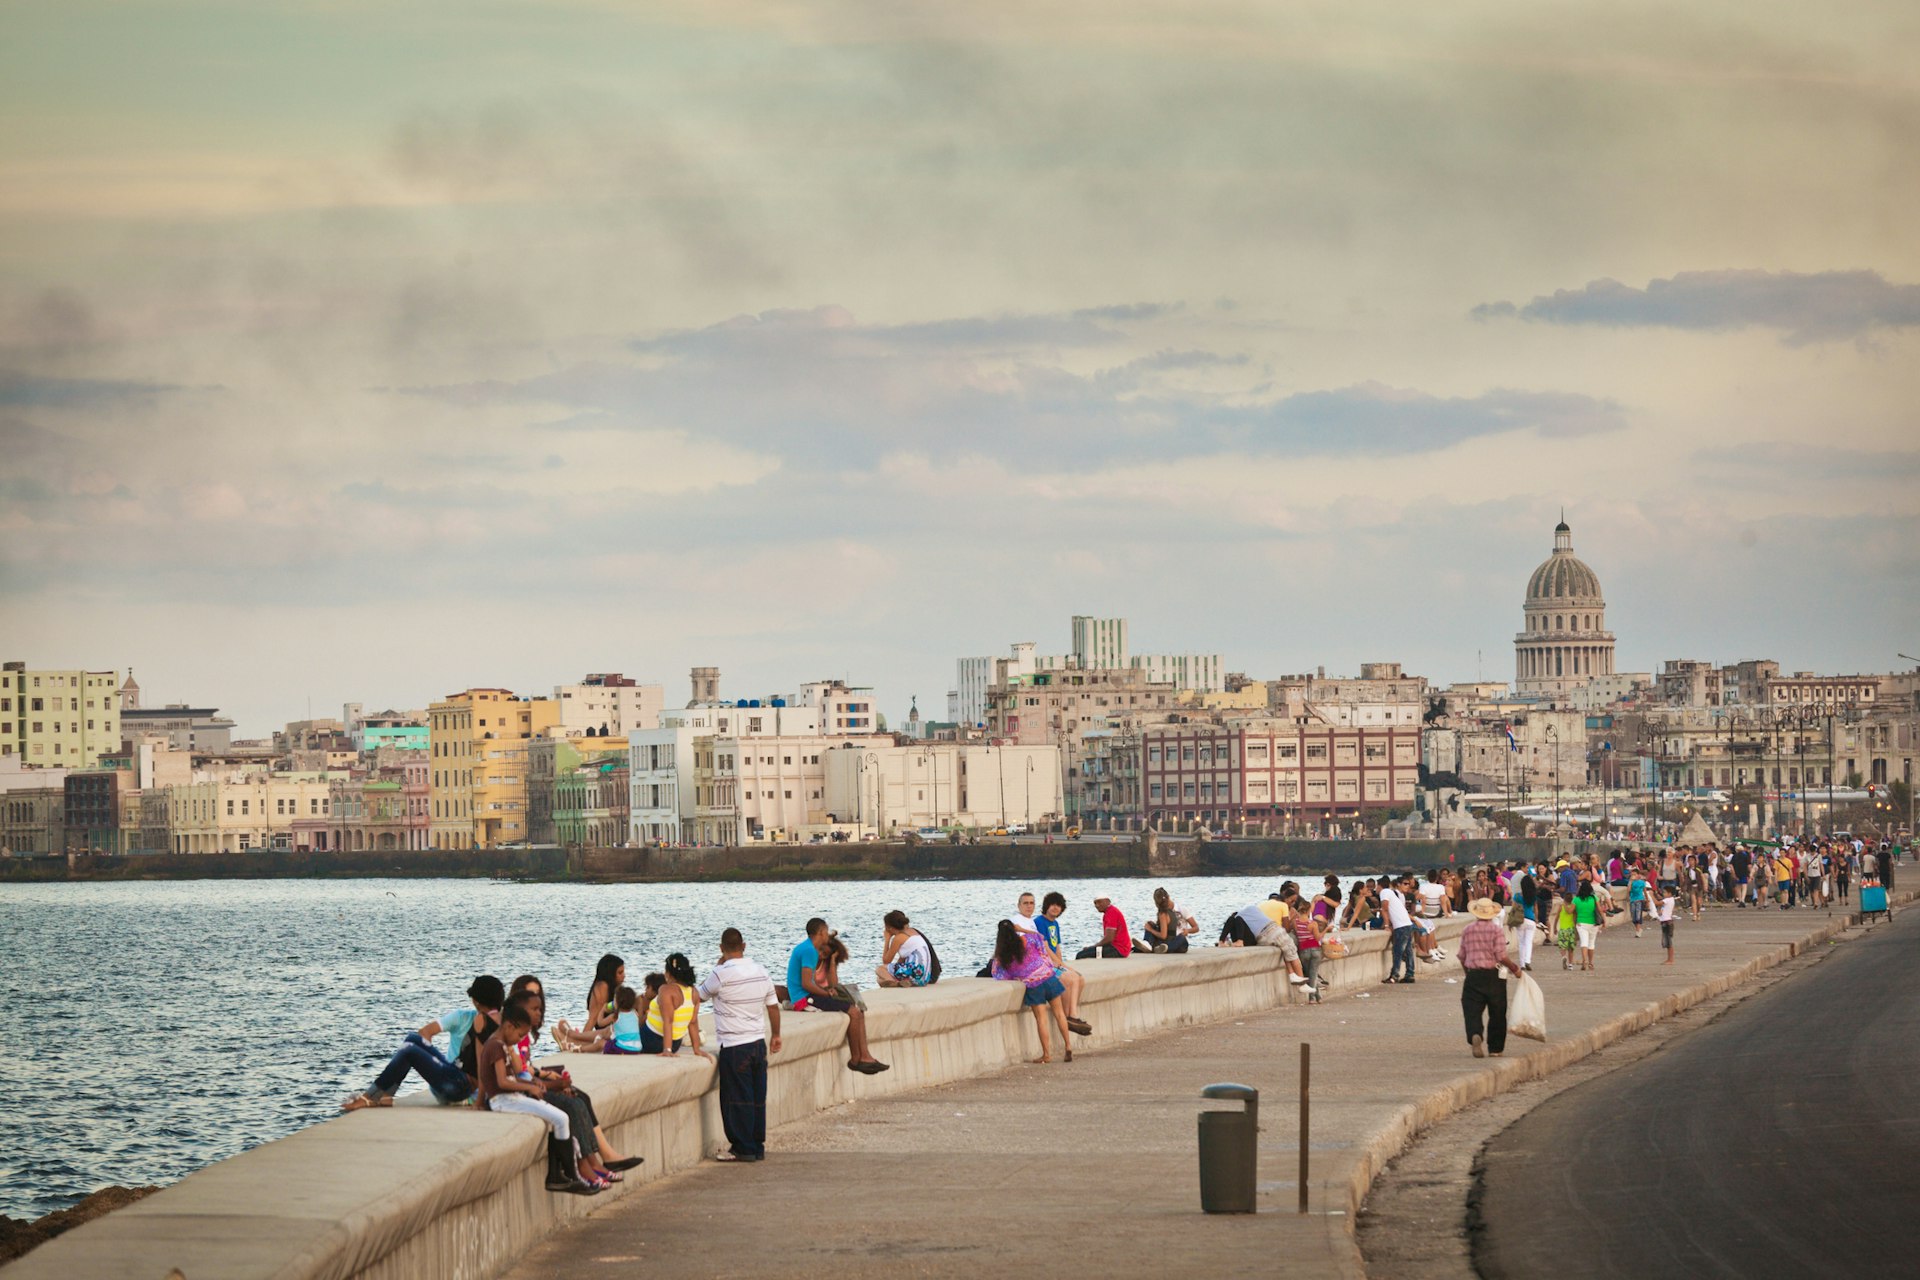 People sit along a sea wall in the evening as the sun starts to set. The city scape, dominated by a large domed building, stretches out behind them